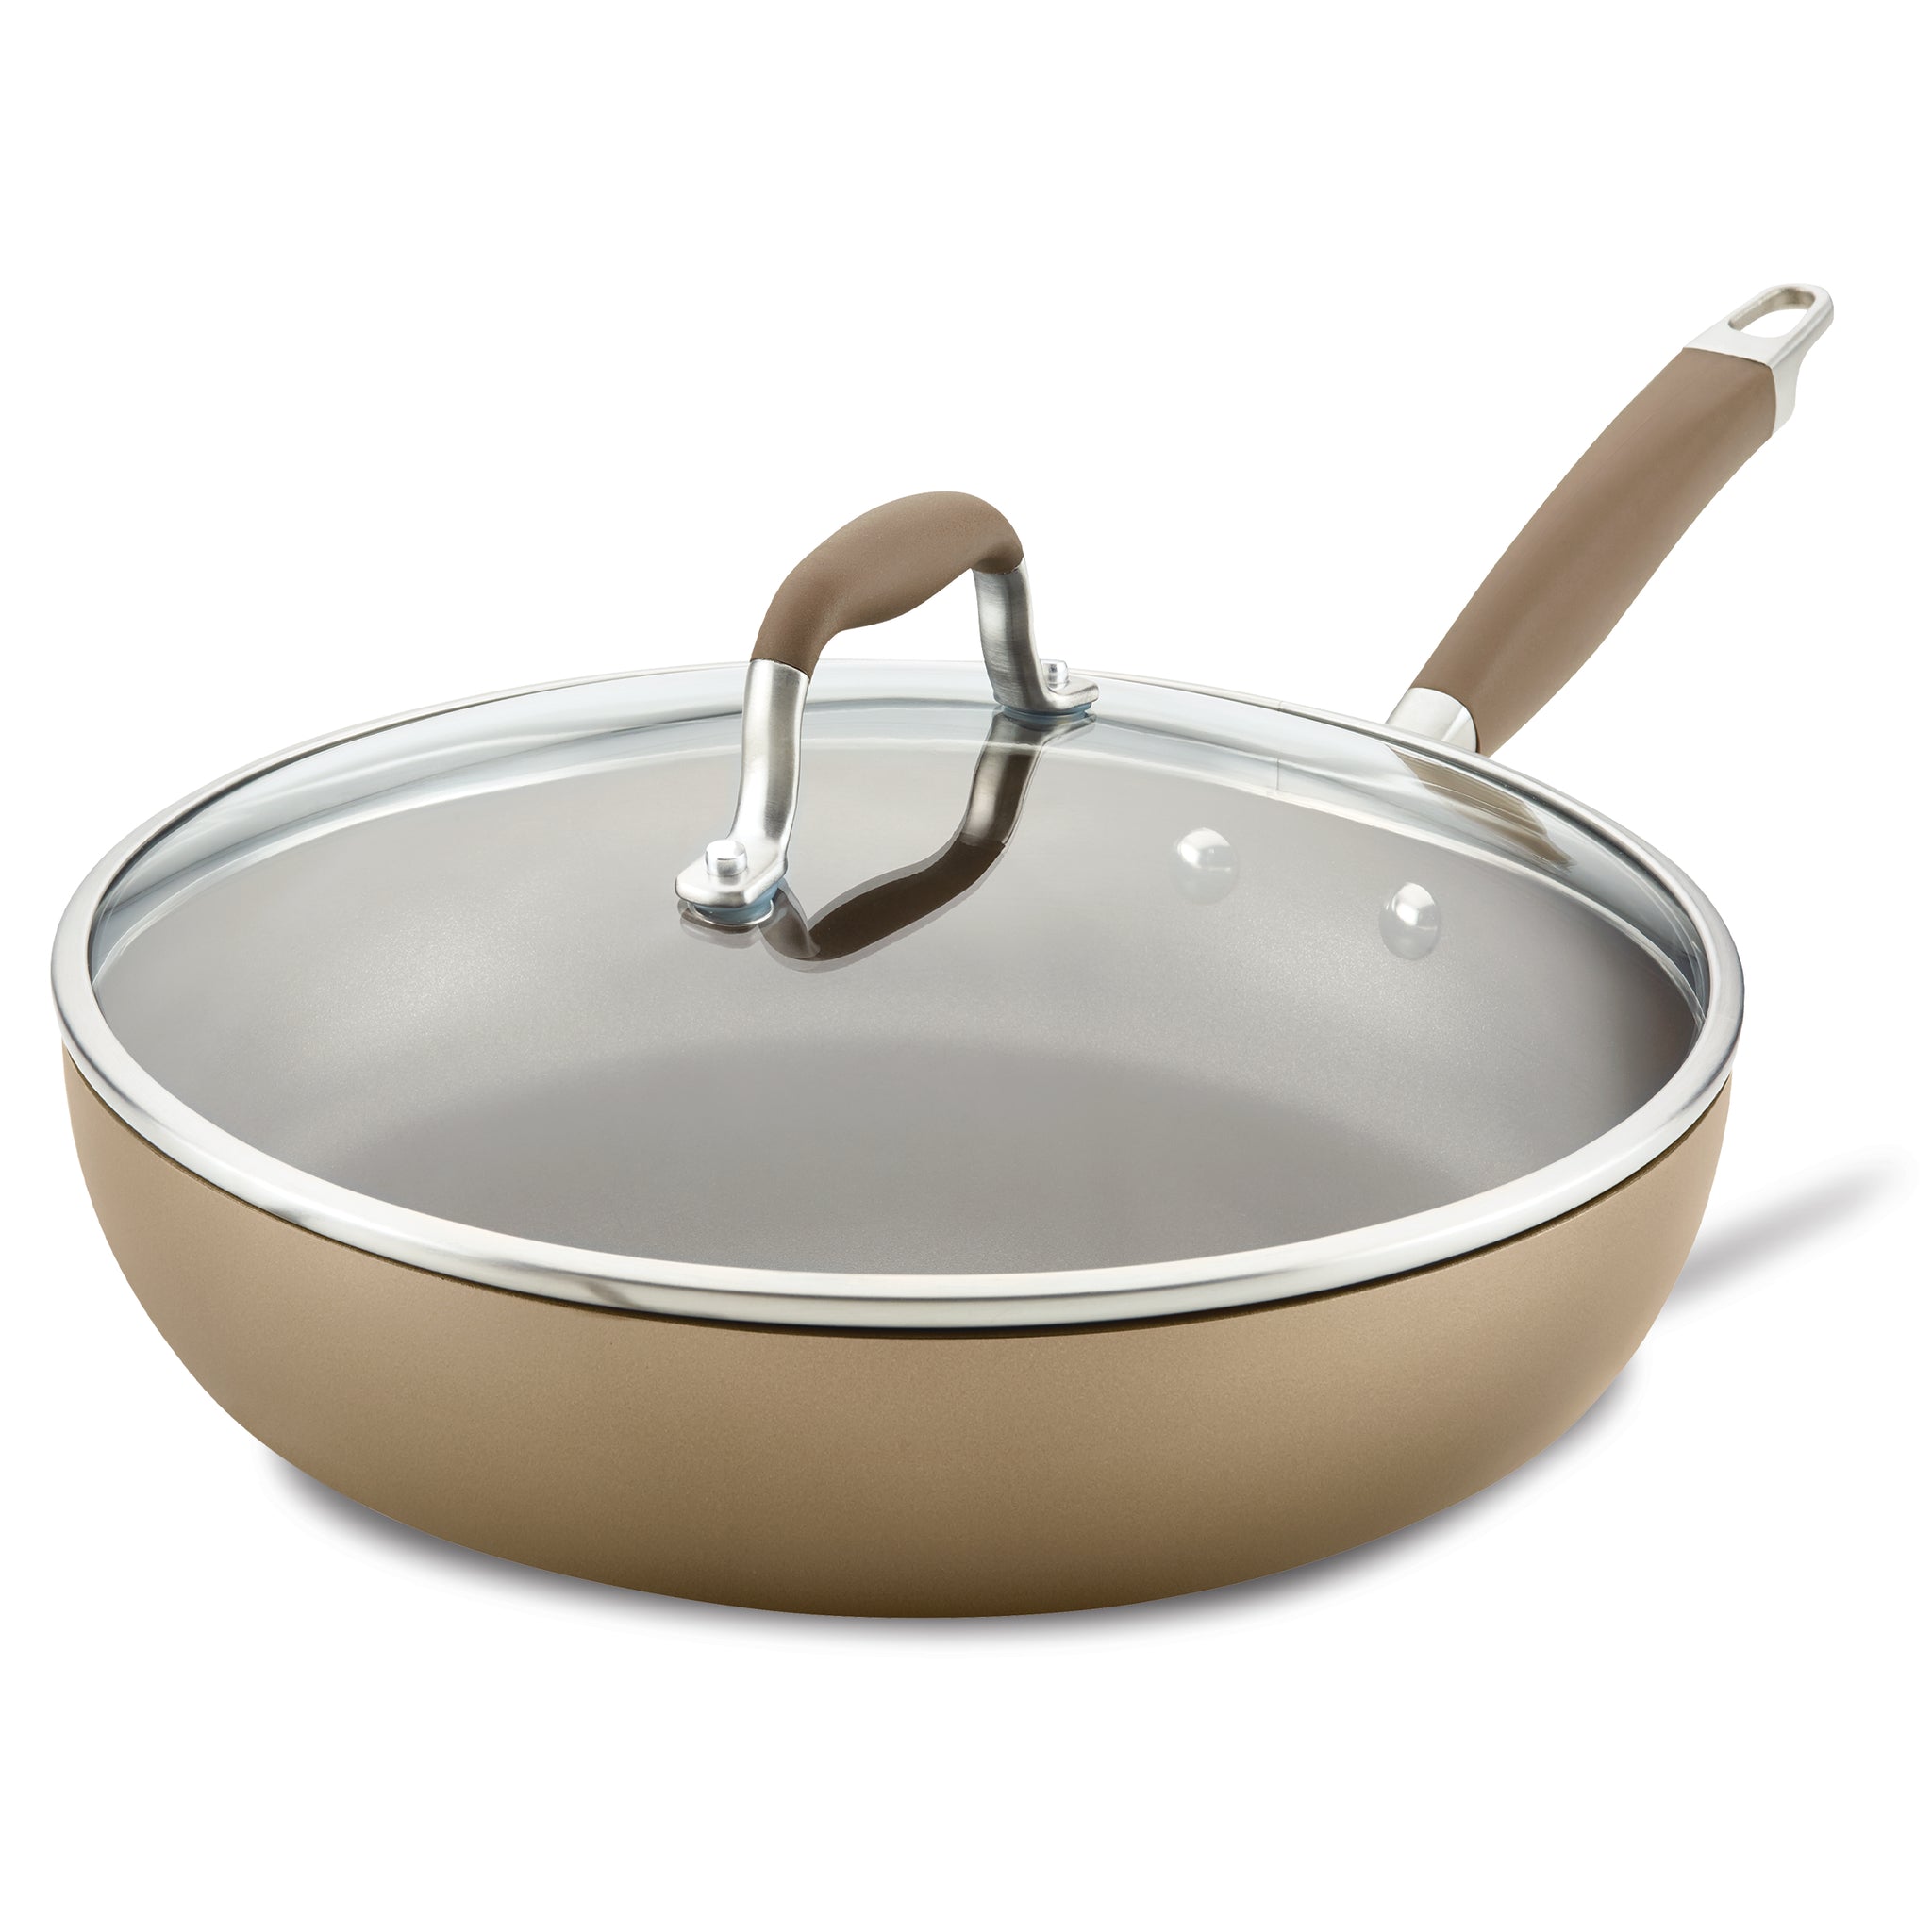 11 Inch / 4.5 Quart All In One Large Nonstick Frying Pan With Lid